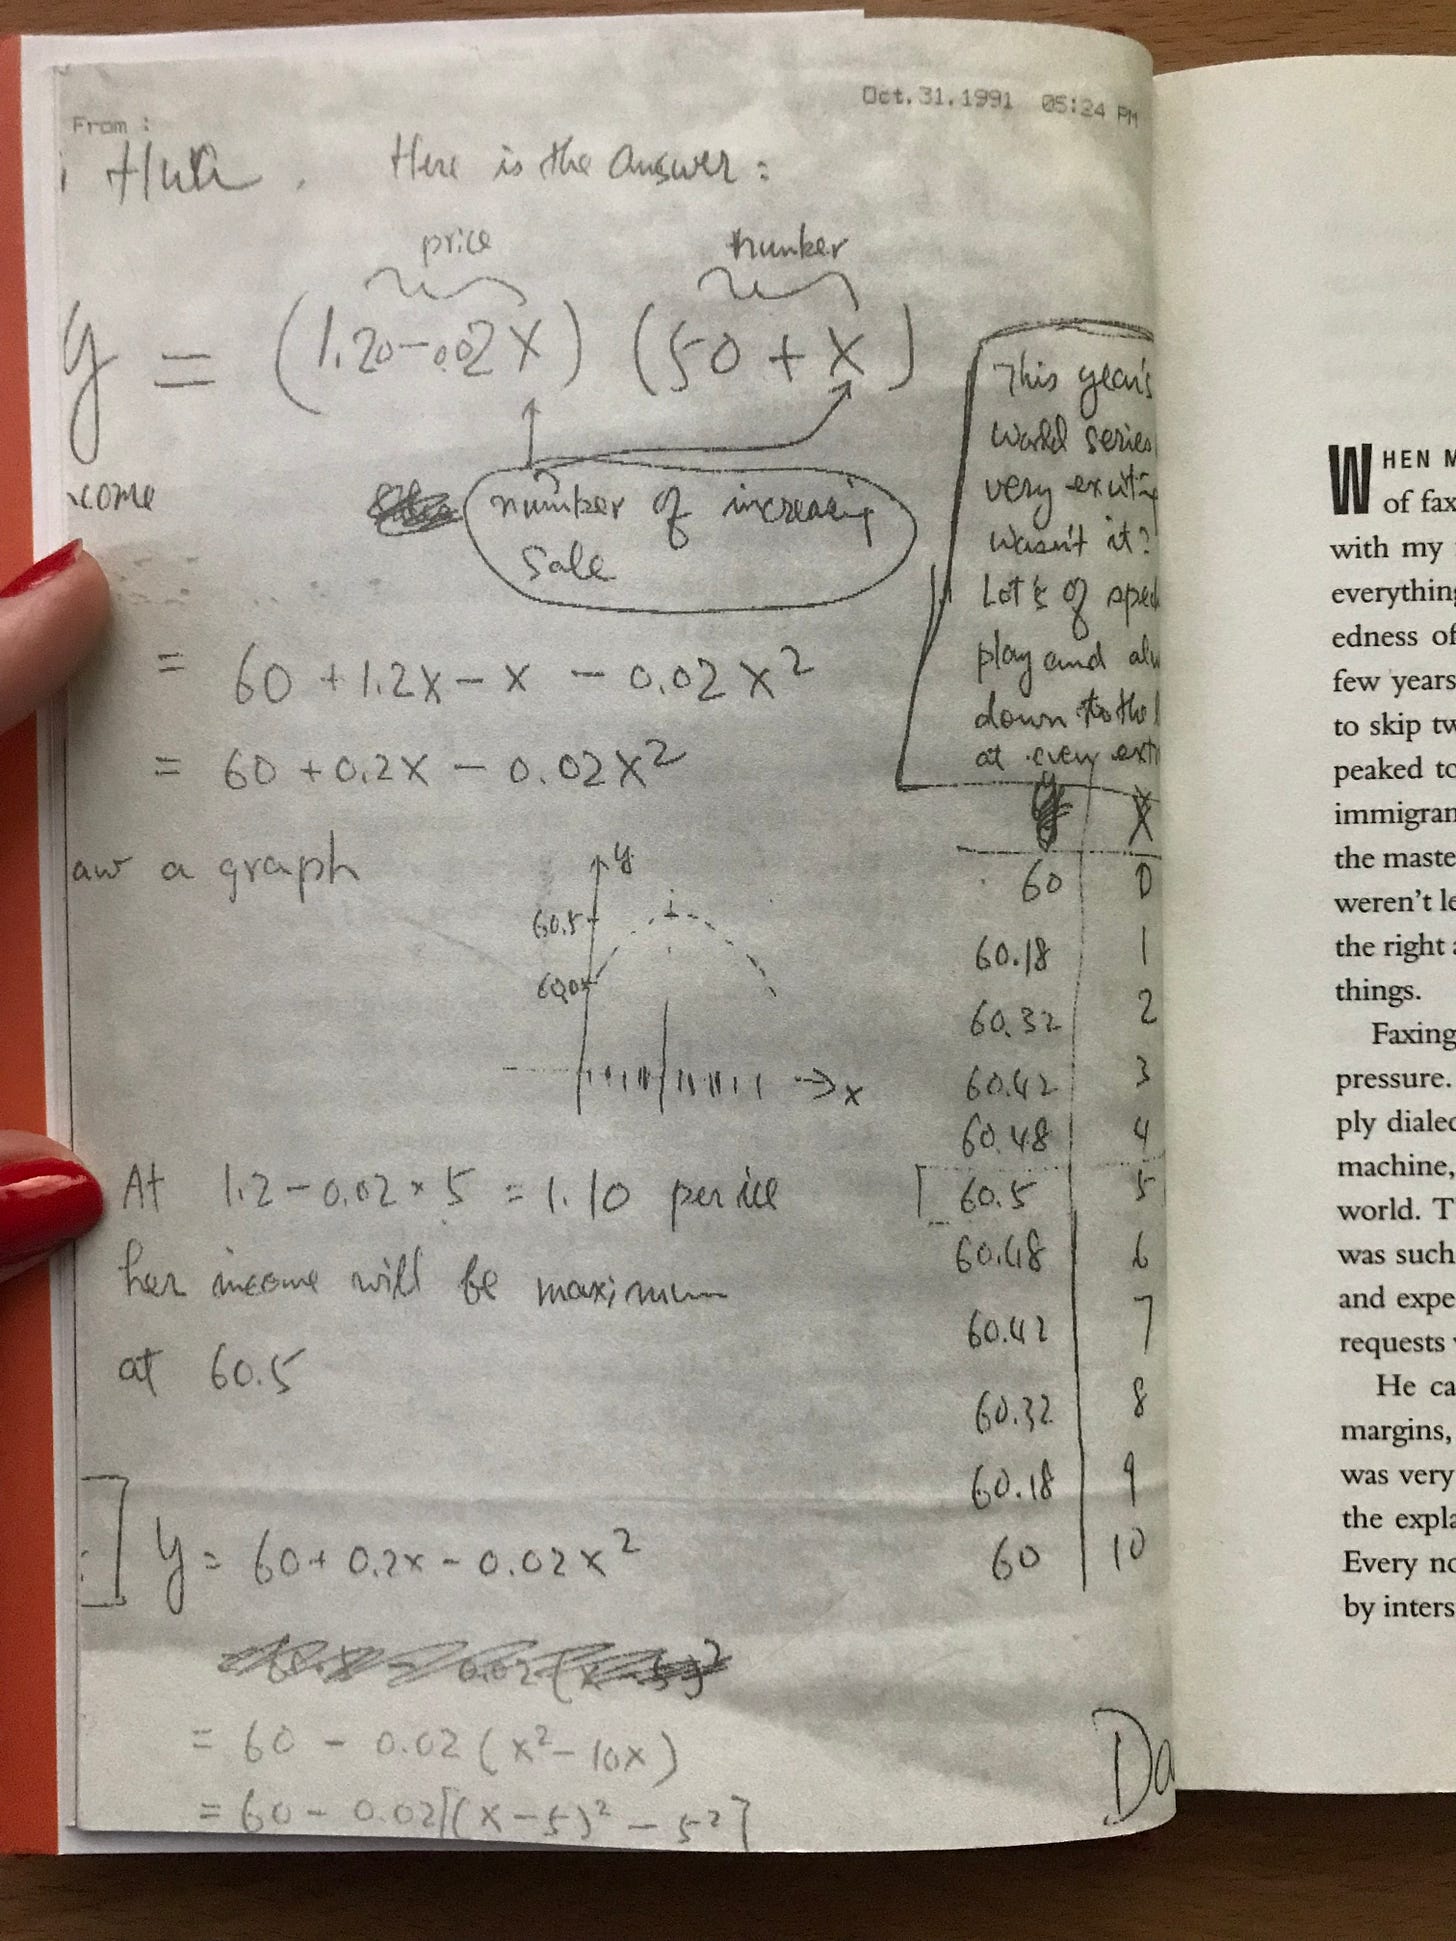 A page from a book that shows a fax with math equations and notes written in cursive from the author's father in 1991.